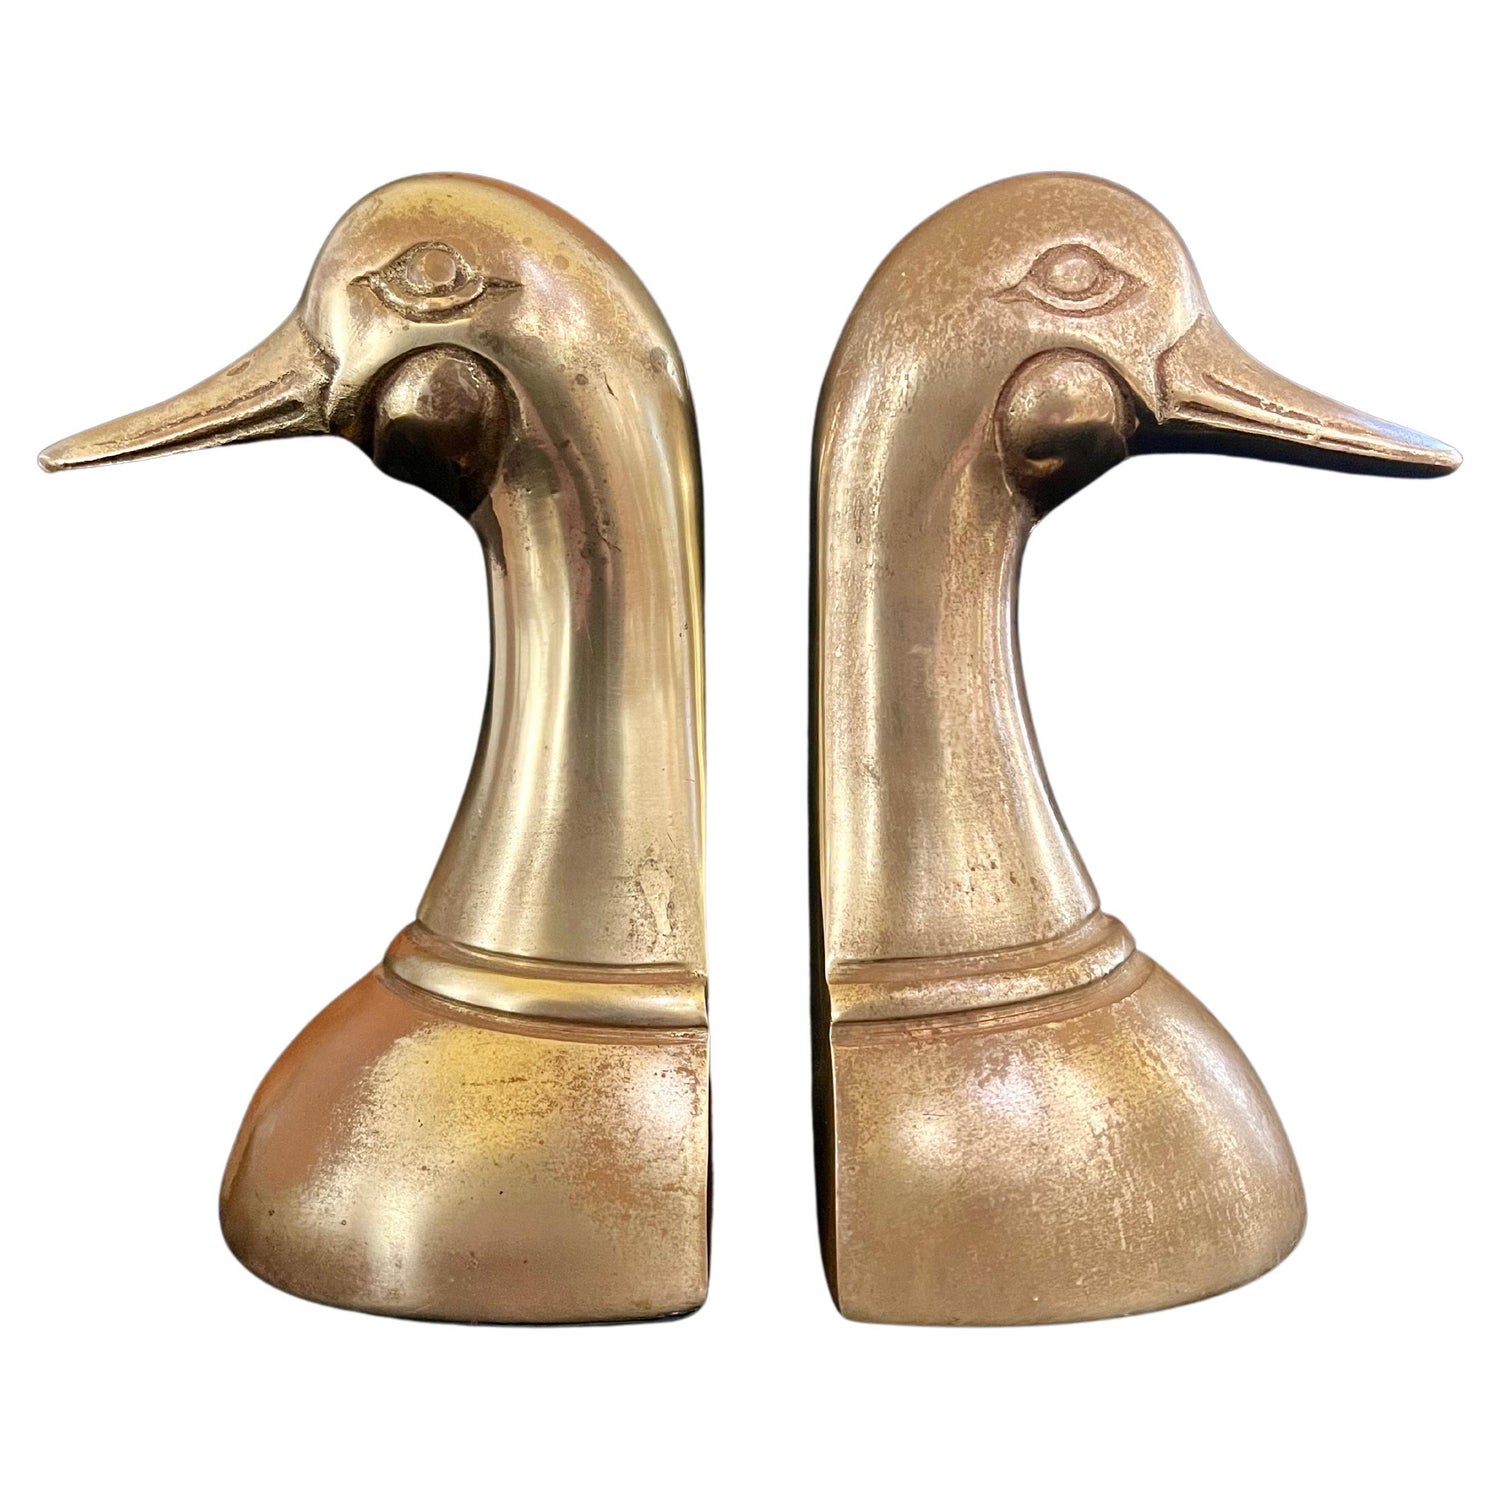 https://a.1stdibscdn.com/mid-century-modern-patinated-brass-duck-bookends-for-sale/f_9366/f_378664921704830829535/f_37866492_1704830830752_bg_processed.jpg?width=1500